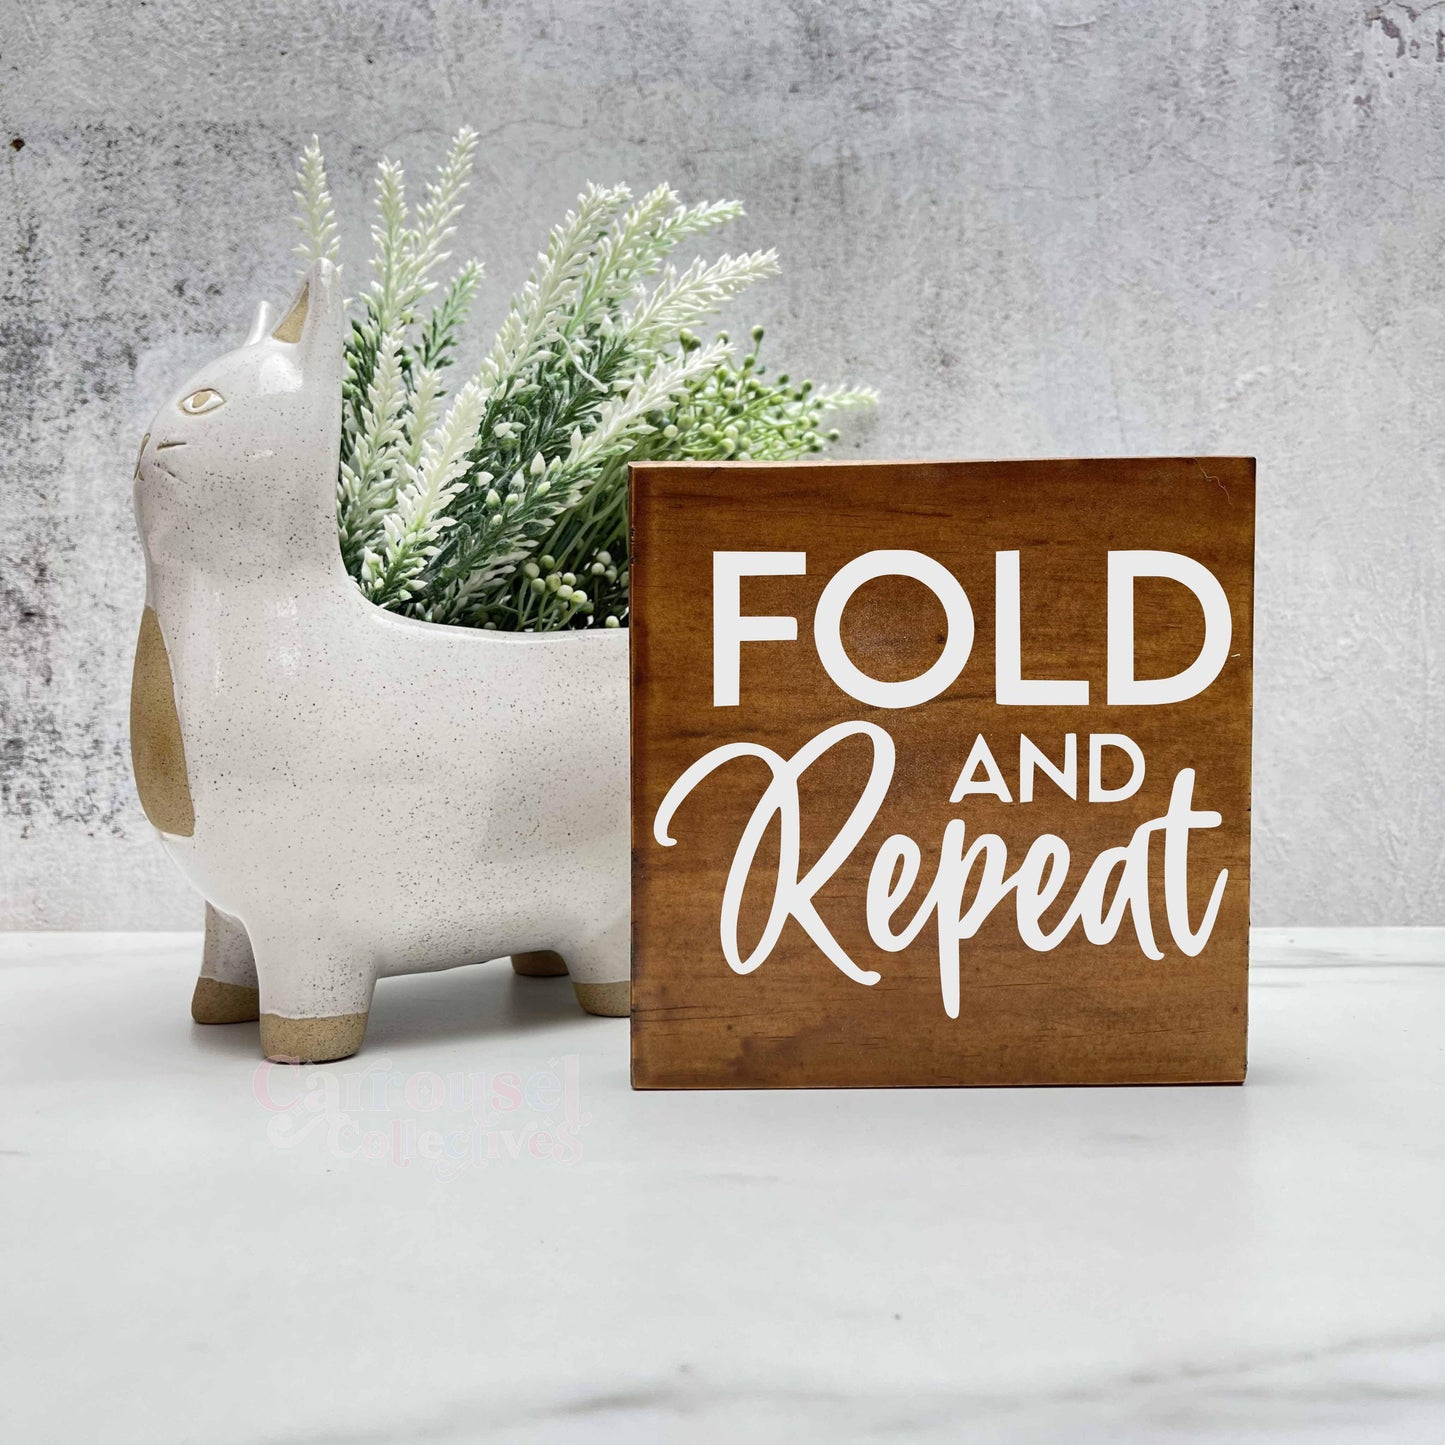 Fold and repeat, laundry wood sign, laundry decor, home decor